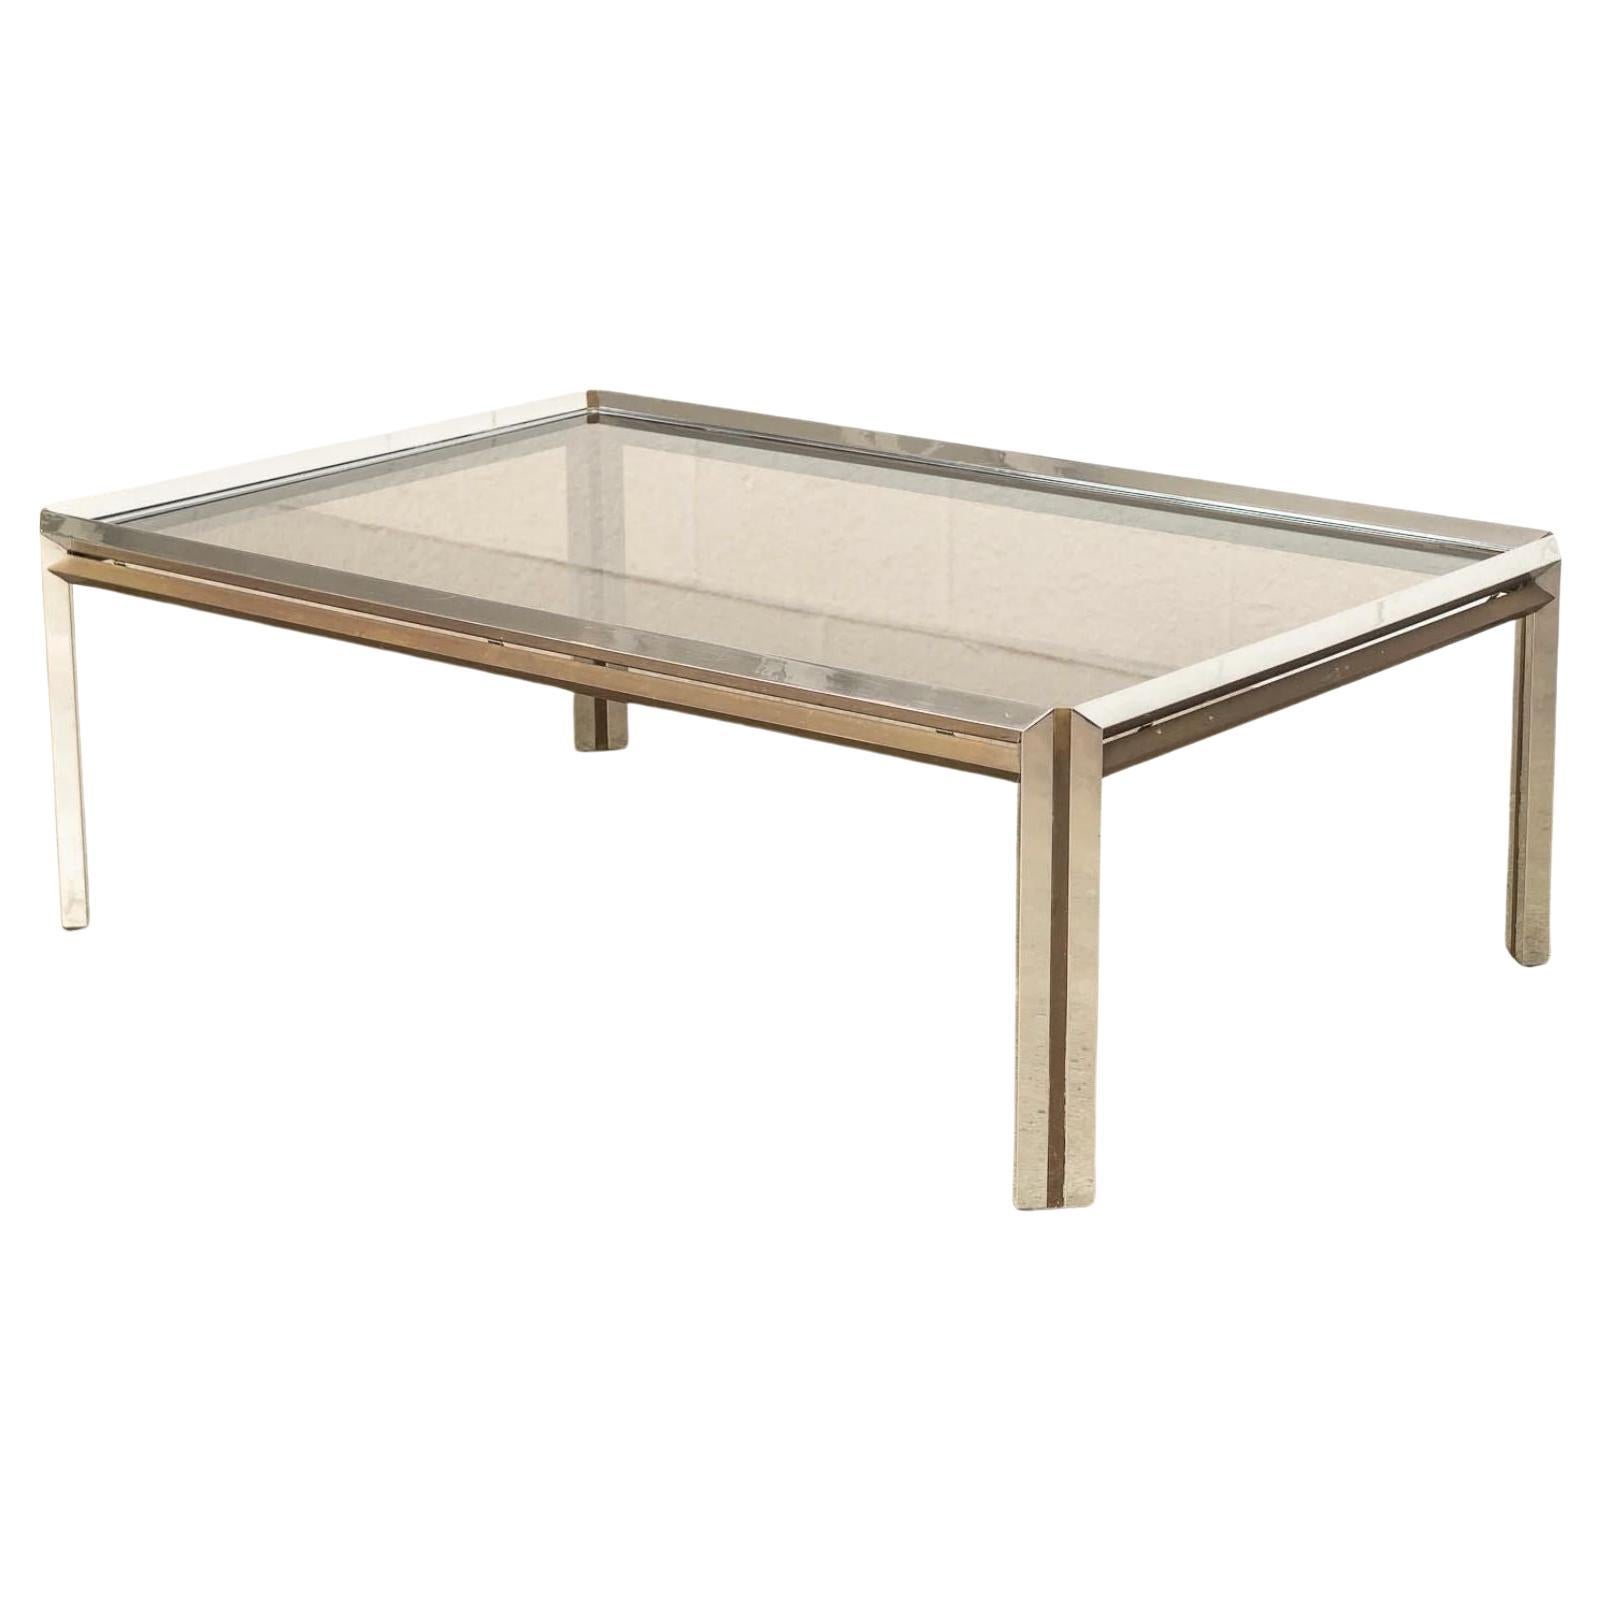 Mid-Century Modern Coffee Table in Chrome, Brass and Glass, 1970s For Sale